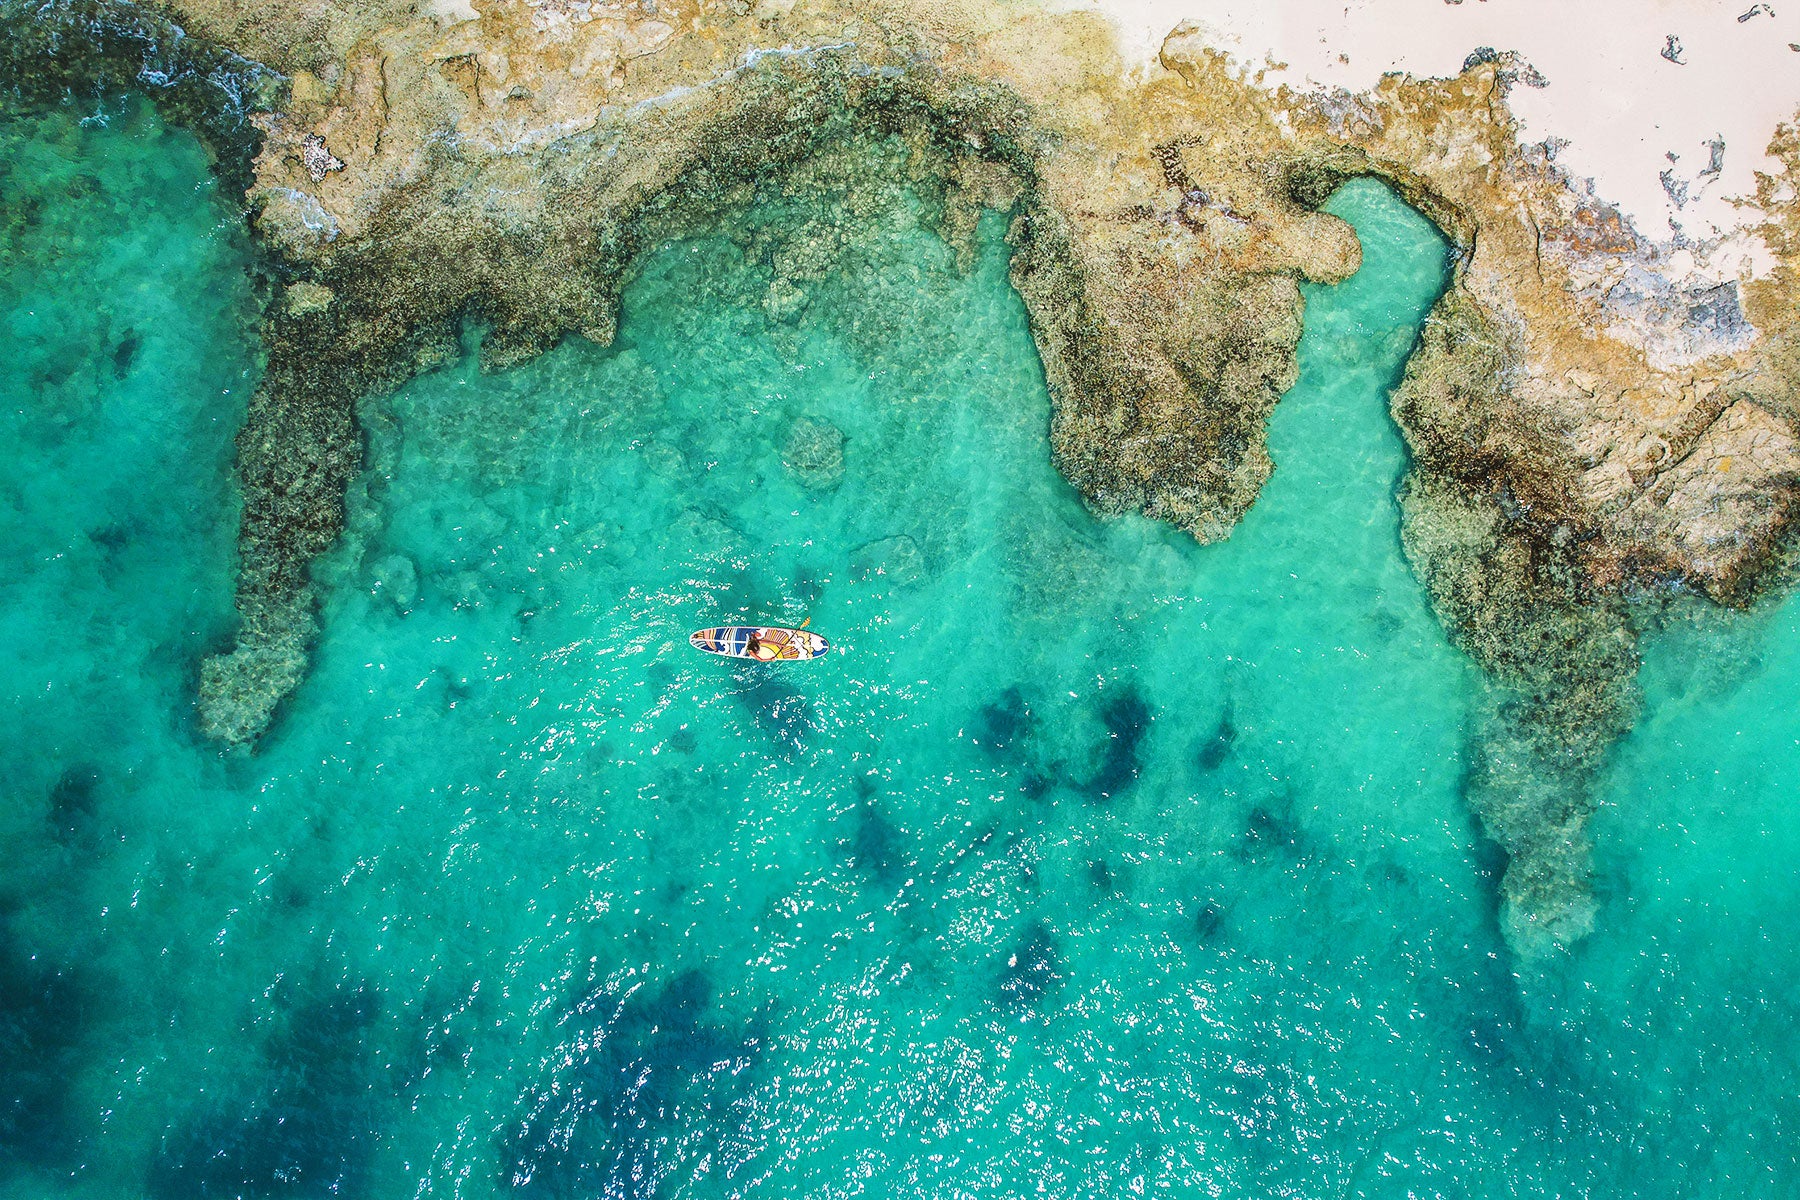 An aerial image of a paddleboard on the ocean next to the shoreline of rocky outcrops